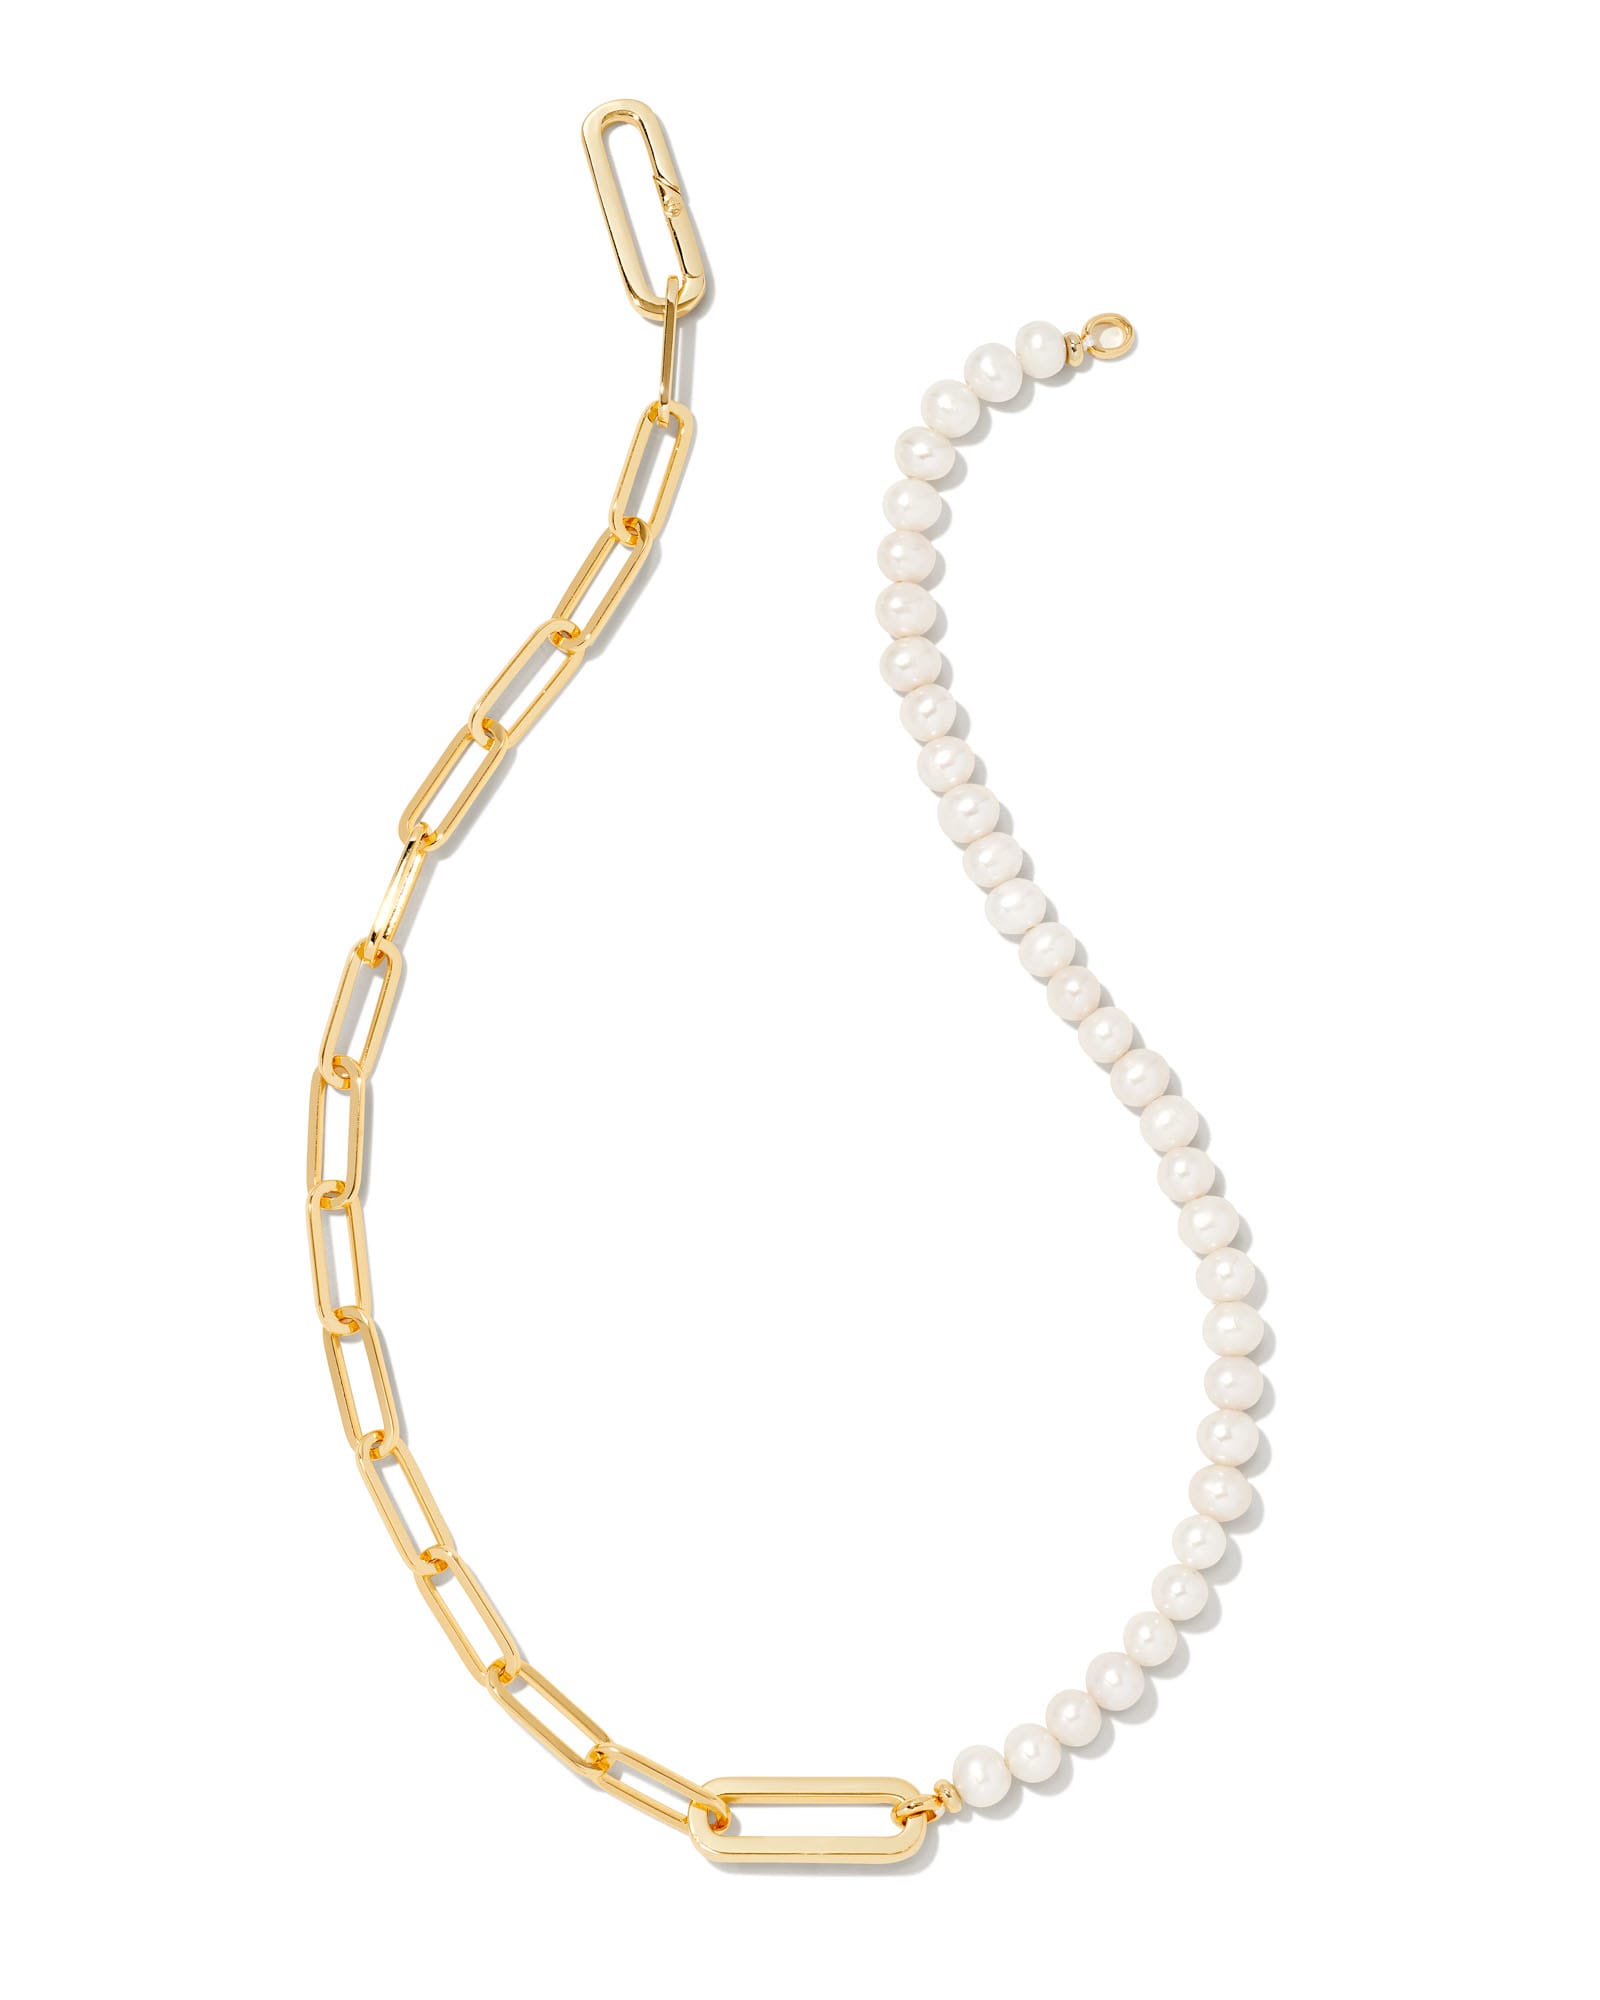 Ashton Gold Half Chain Necklace in White Pearl image number 0.0